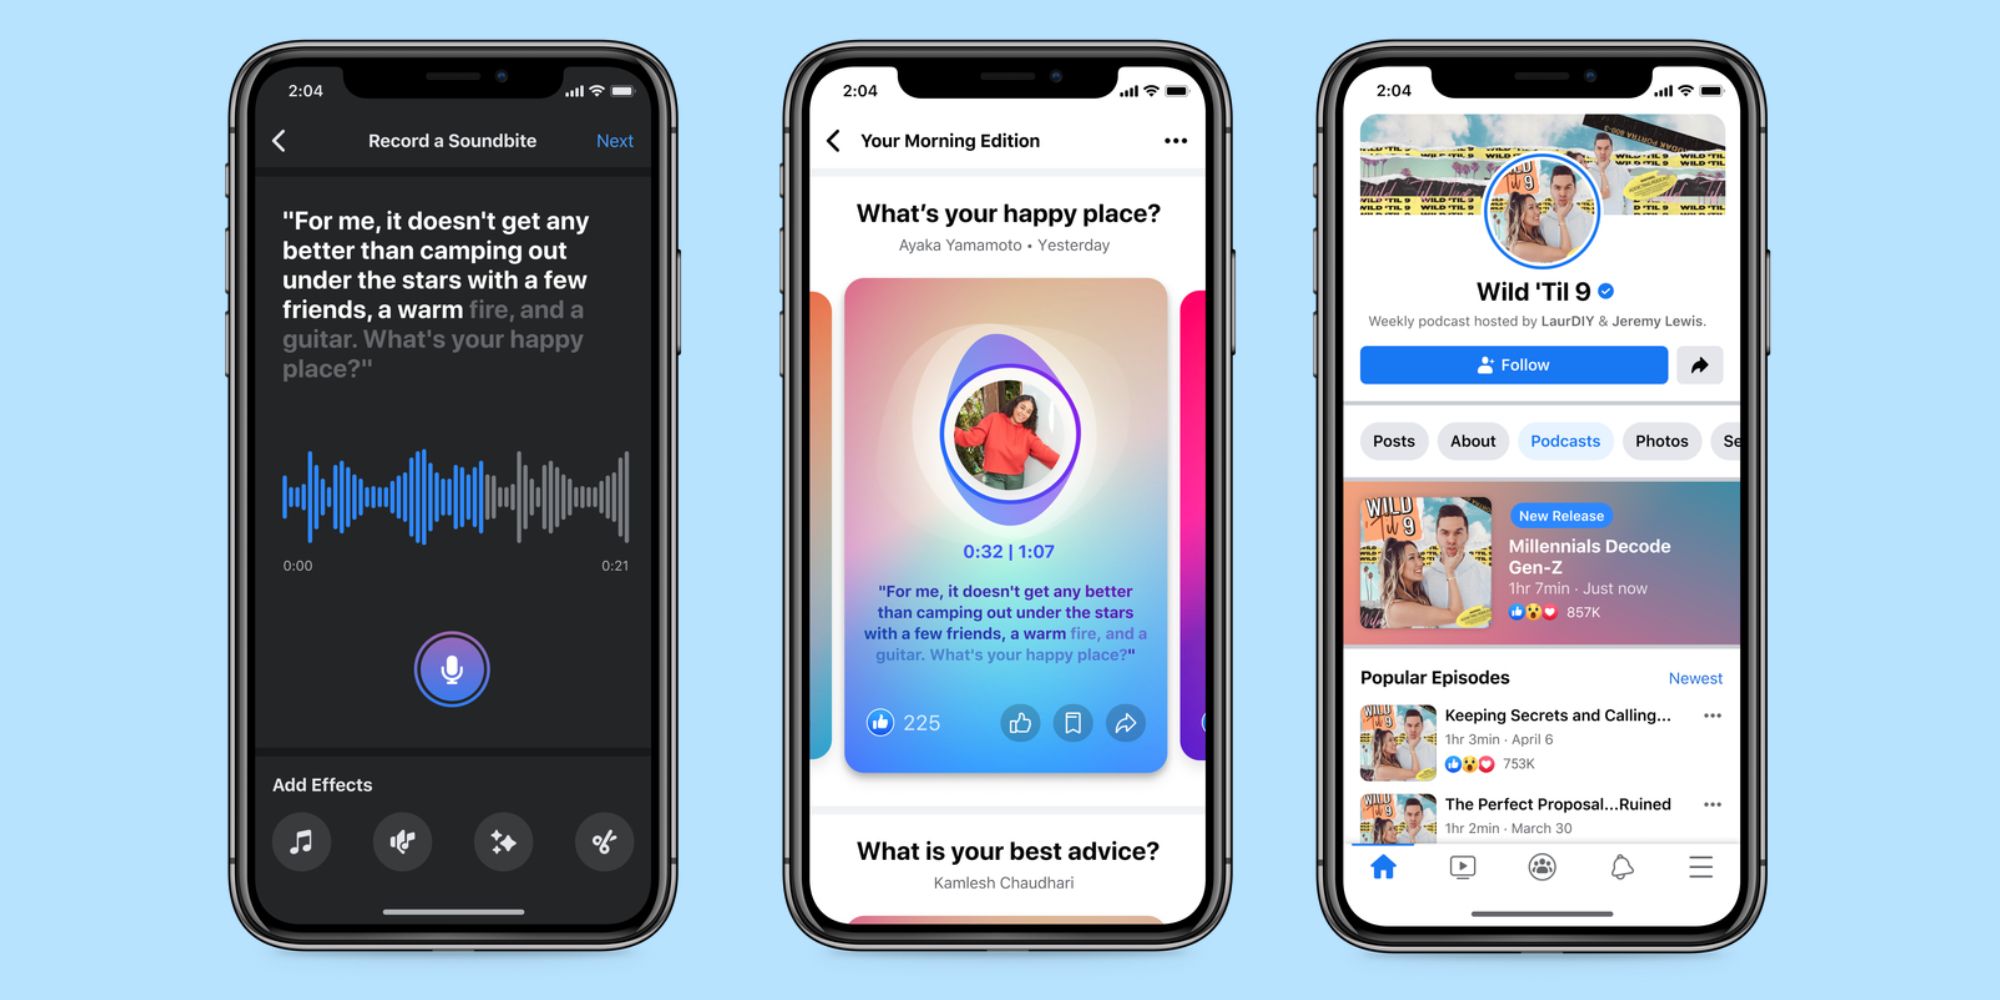 Facebook App Users Can Listen To Podcasts From Next Week